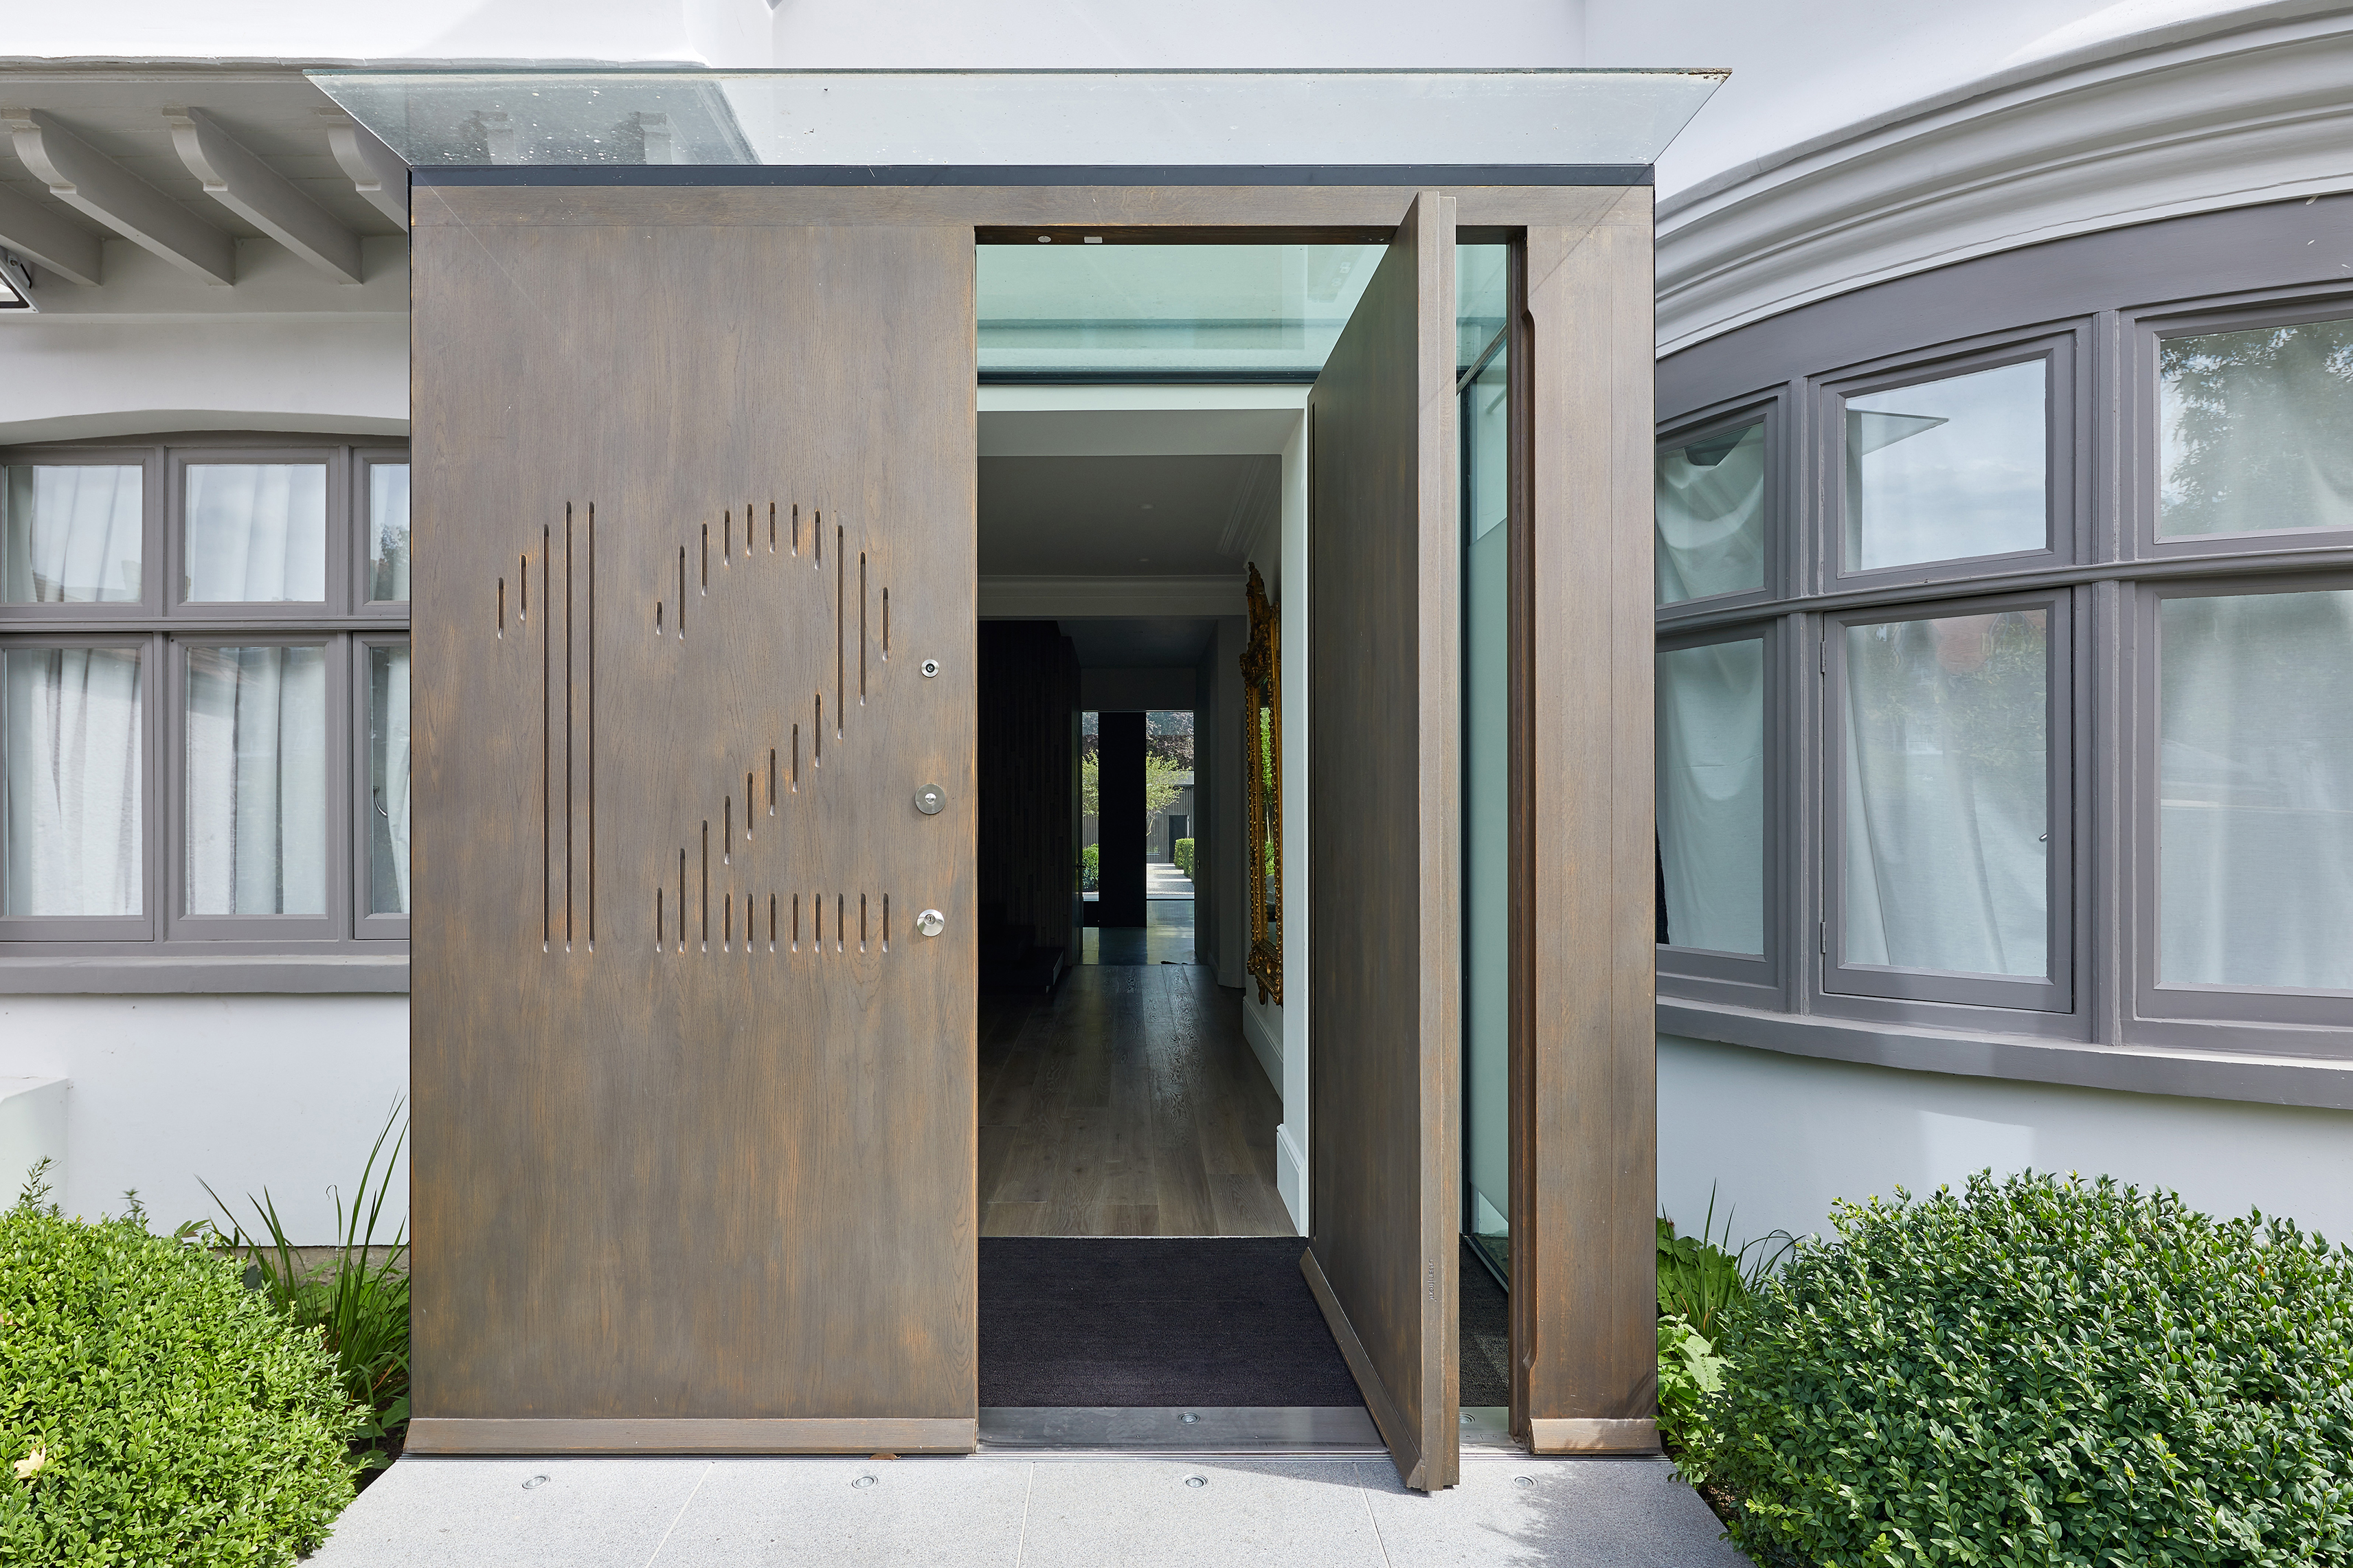 Create a grand entrance with a frameless glass box completed with a smart bespoke door. Raw E80 pivot door set and matching boarded panel, in European oak with stained Onyx metallic finish and number engraving, H2.4m x W2m, from £20,000 + VAT, Urban Front. [inc VAT £24,000]